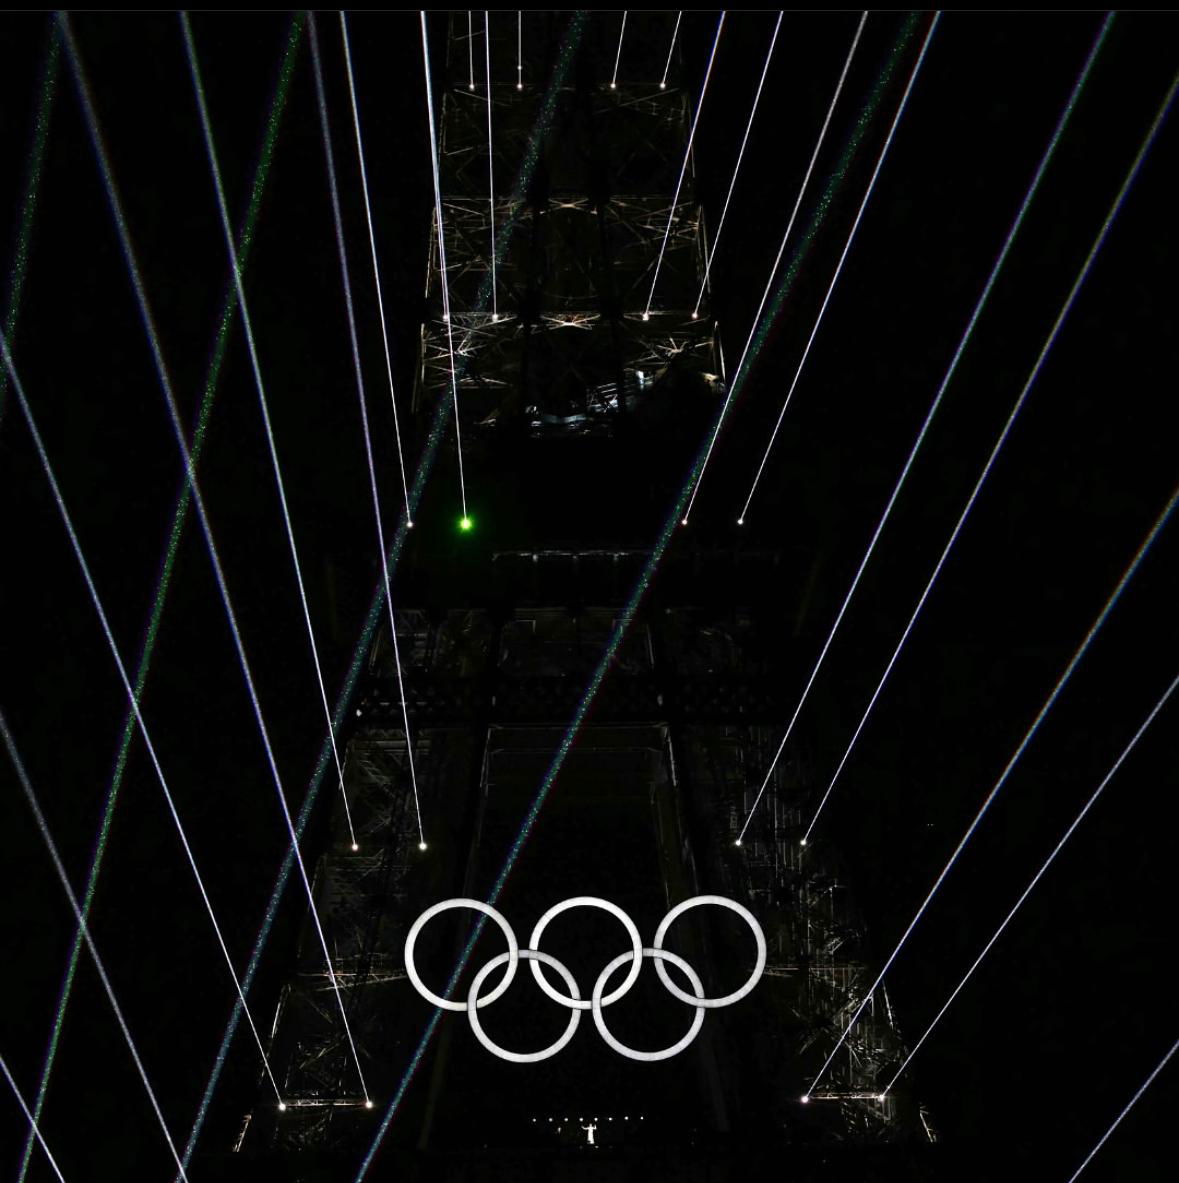 Paris Olympics 2024: Opening Ceremony In Pictures